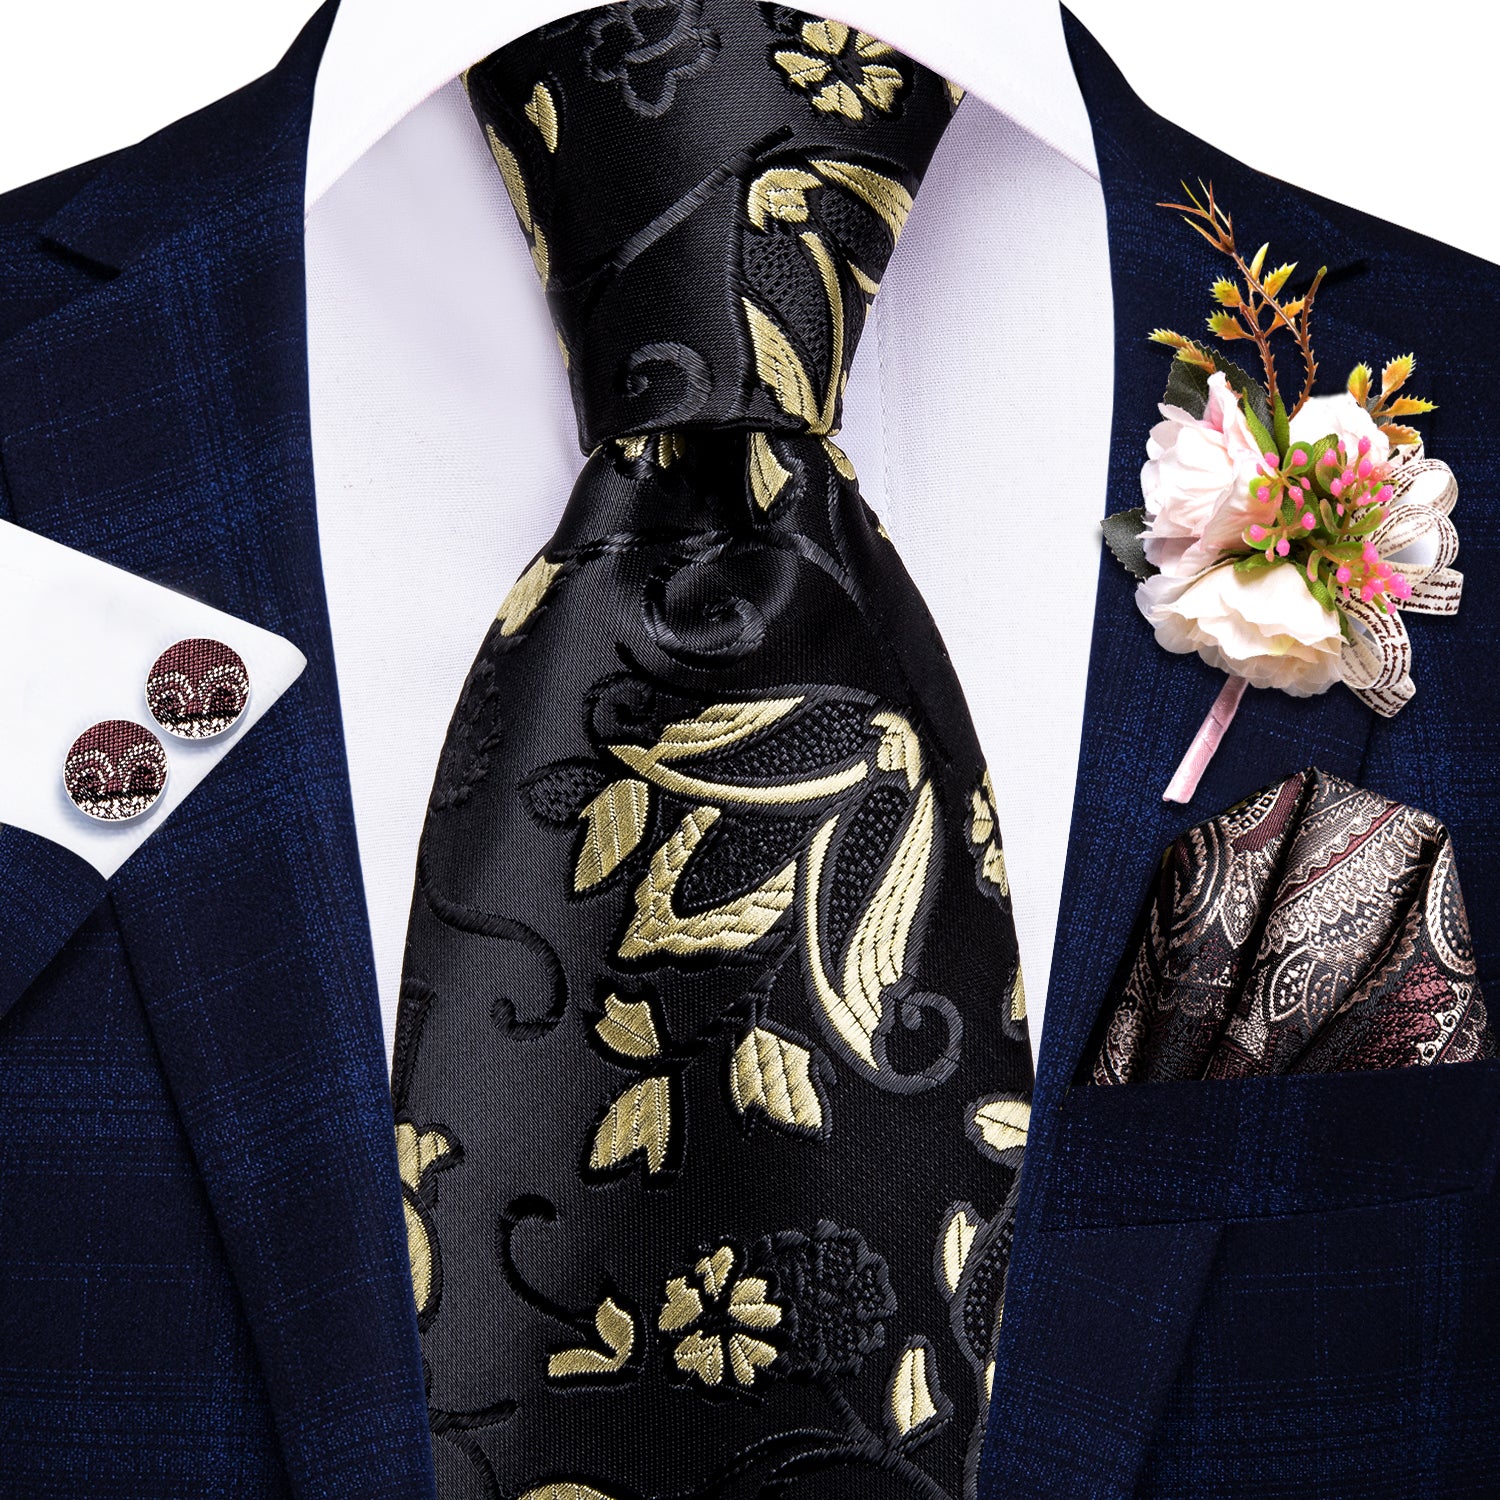 Black Yellow Floral Tie Pocket Square Cufflinks Set with Wedding Brooch